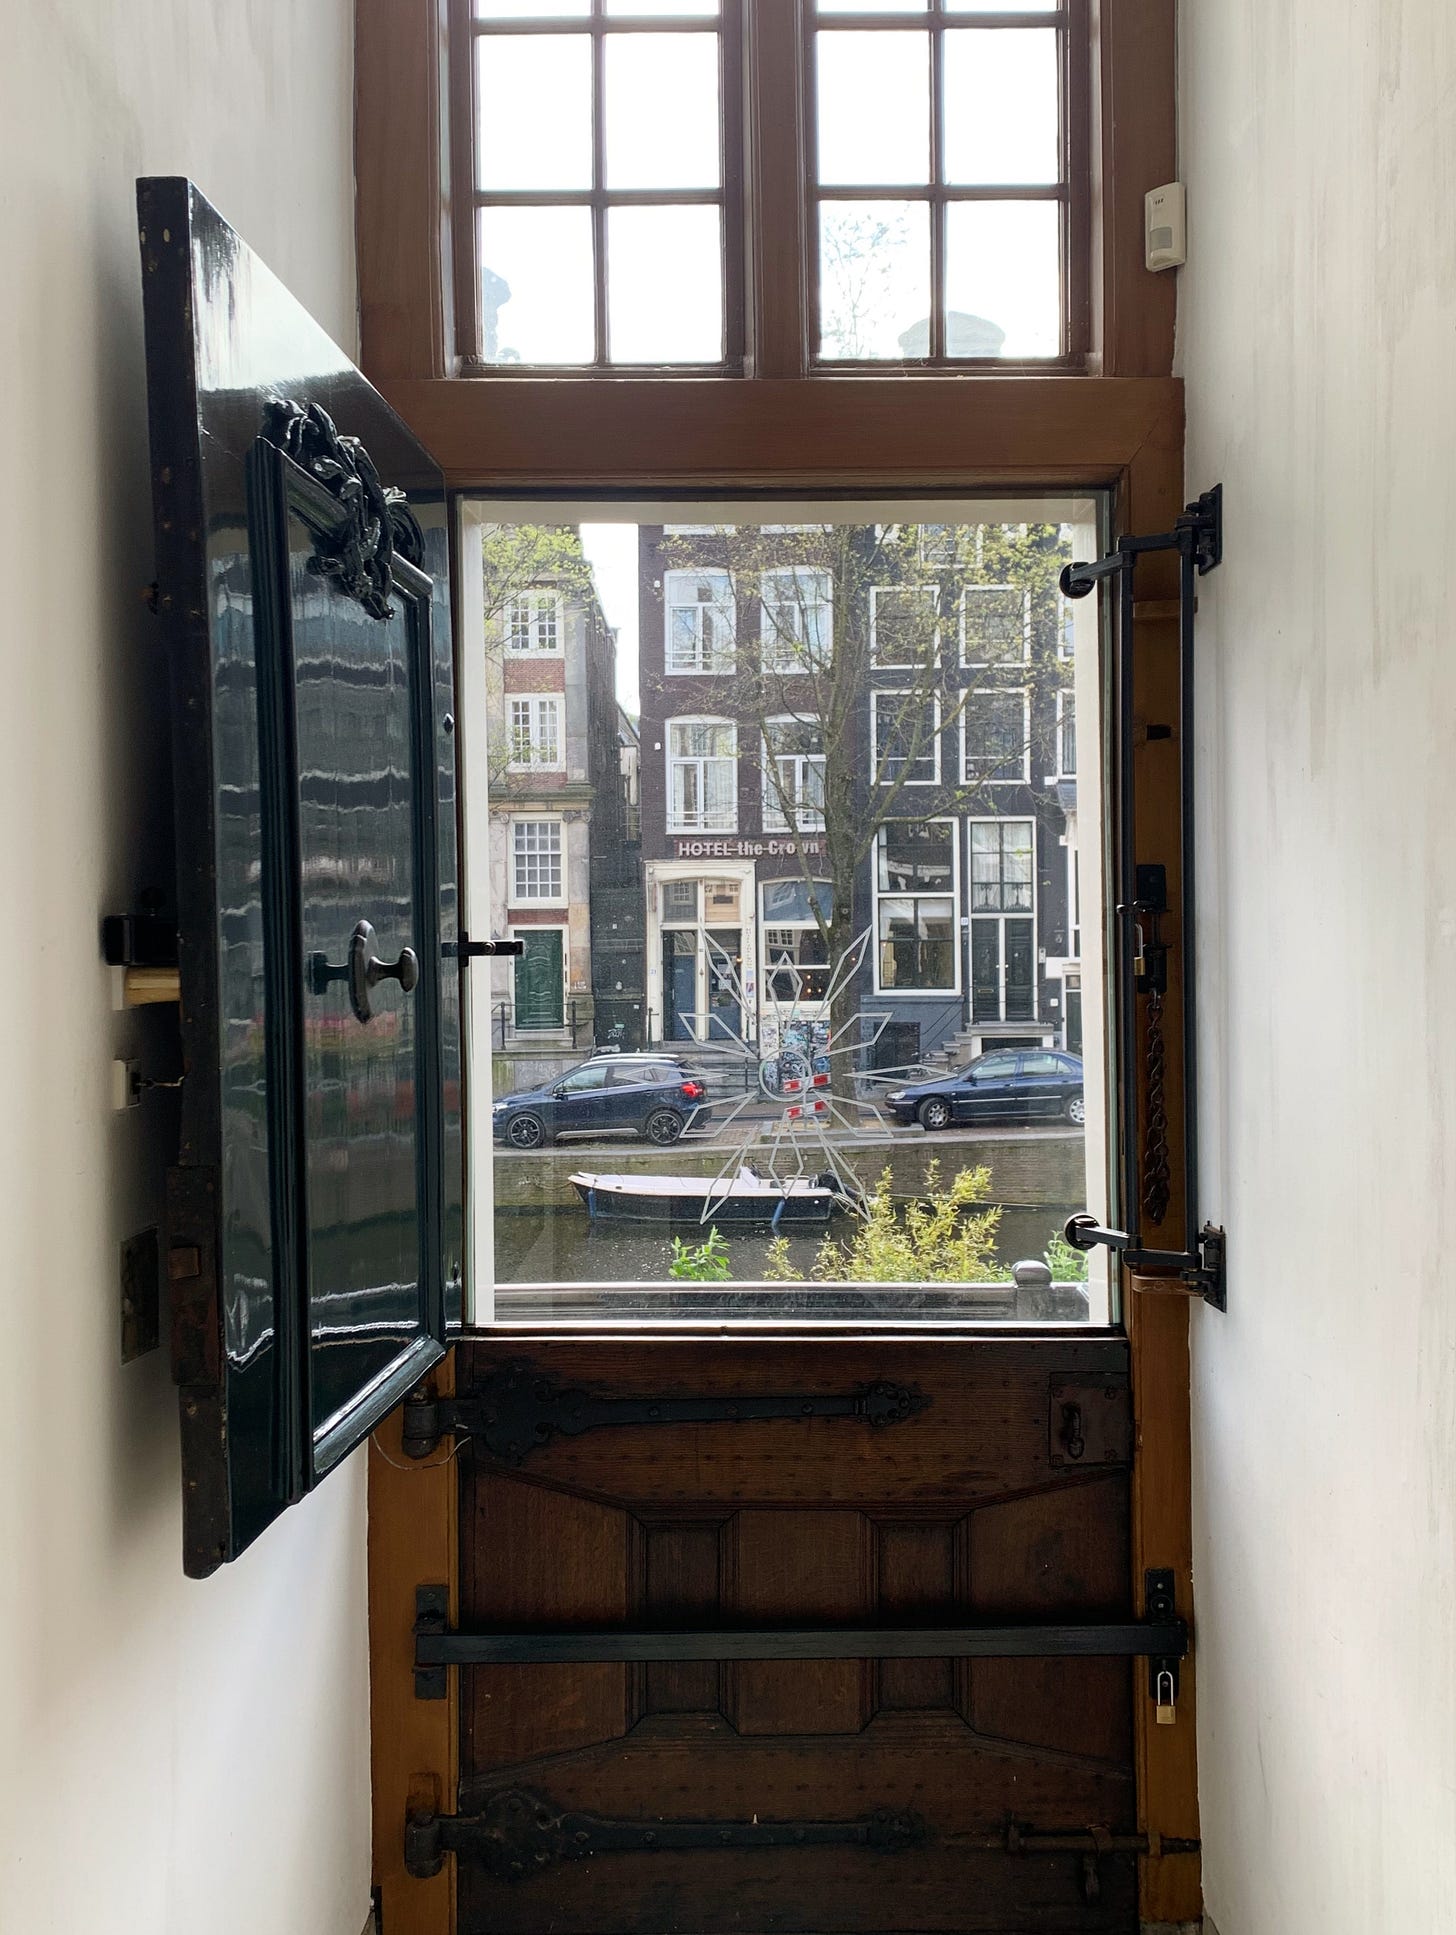 Amsterdam canal house